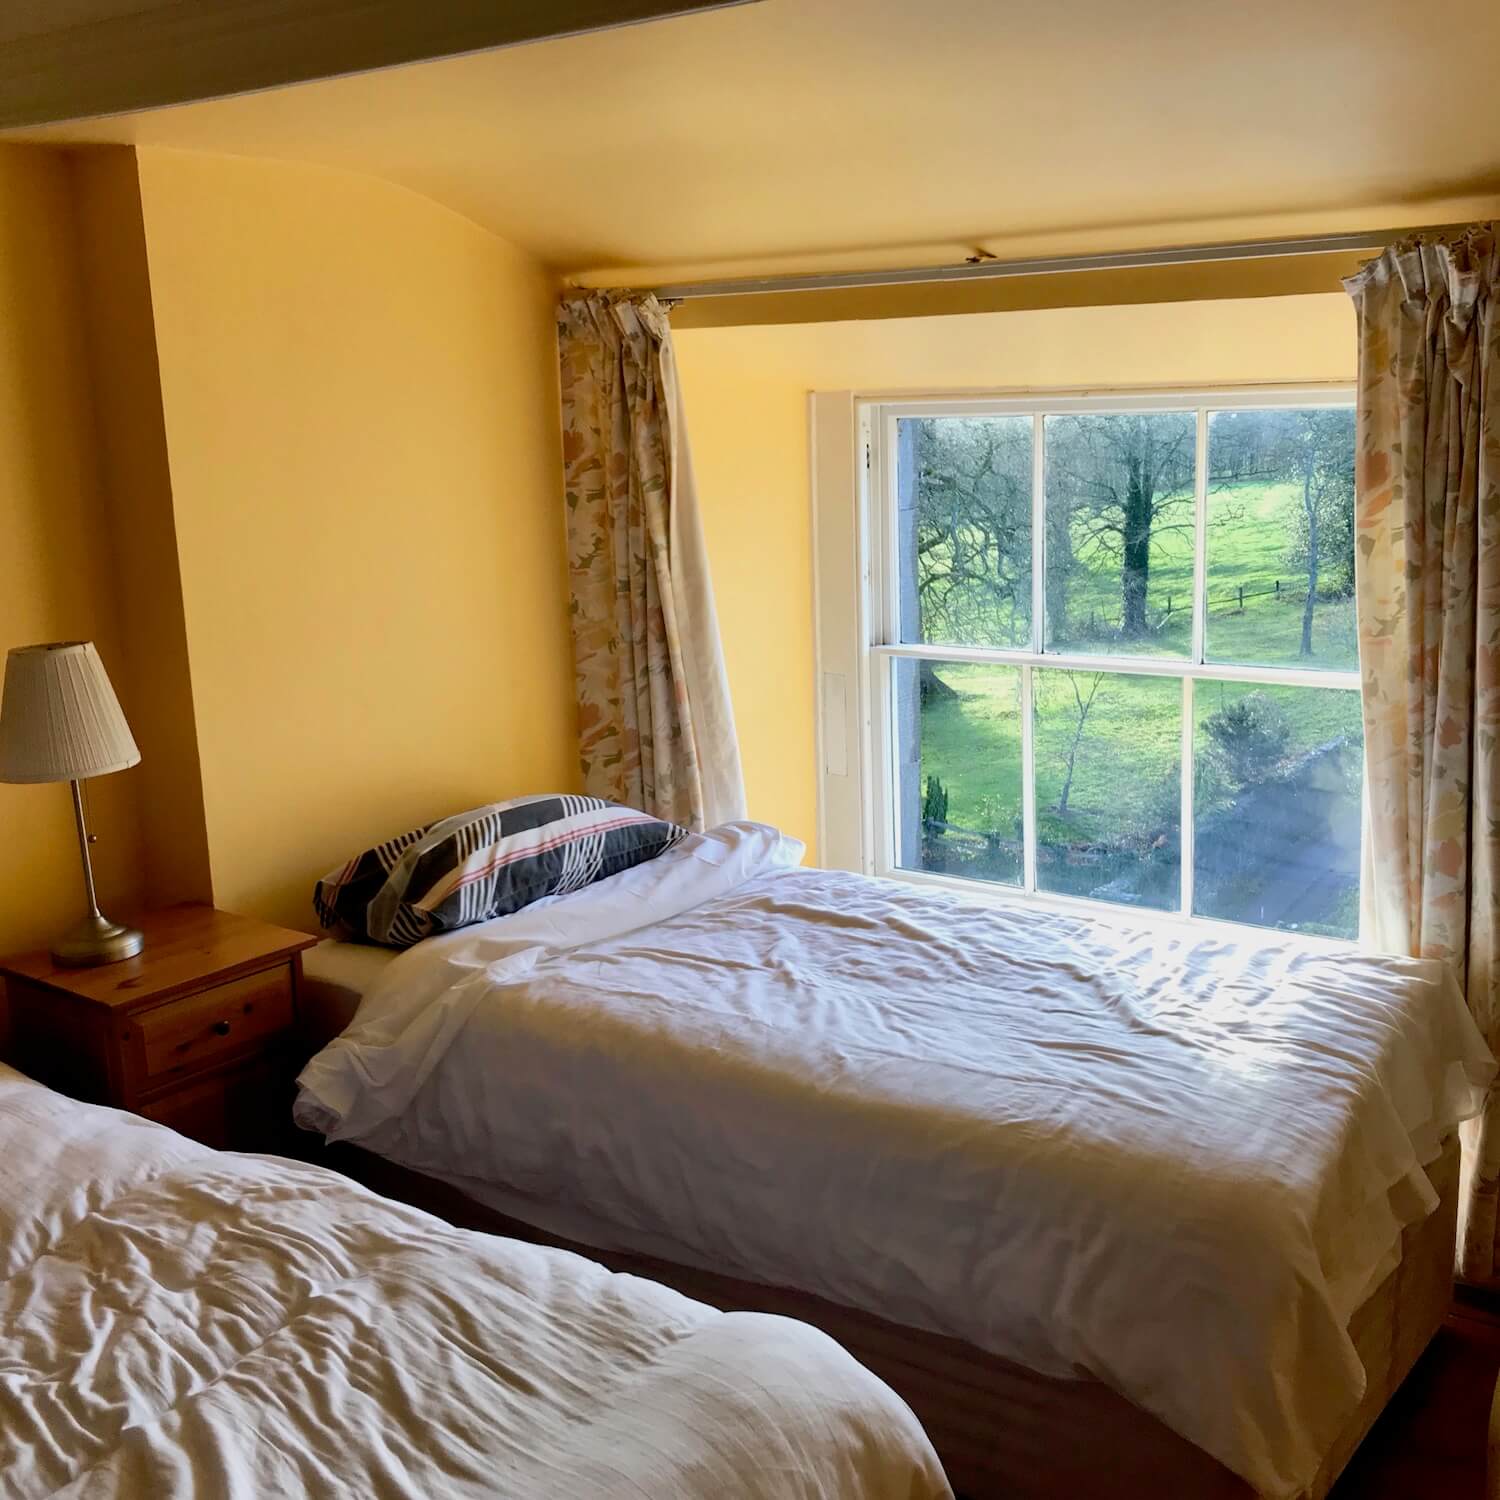 Townley Hall has several dormitory rooms with single beds. My bed was against a large window that looked out upon rolling hills of sheep grazing.